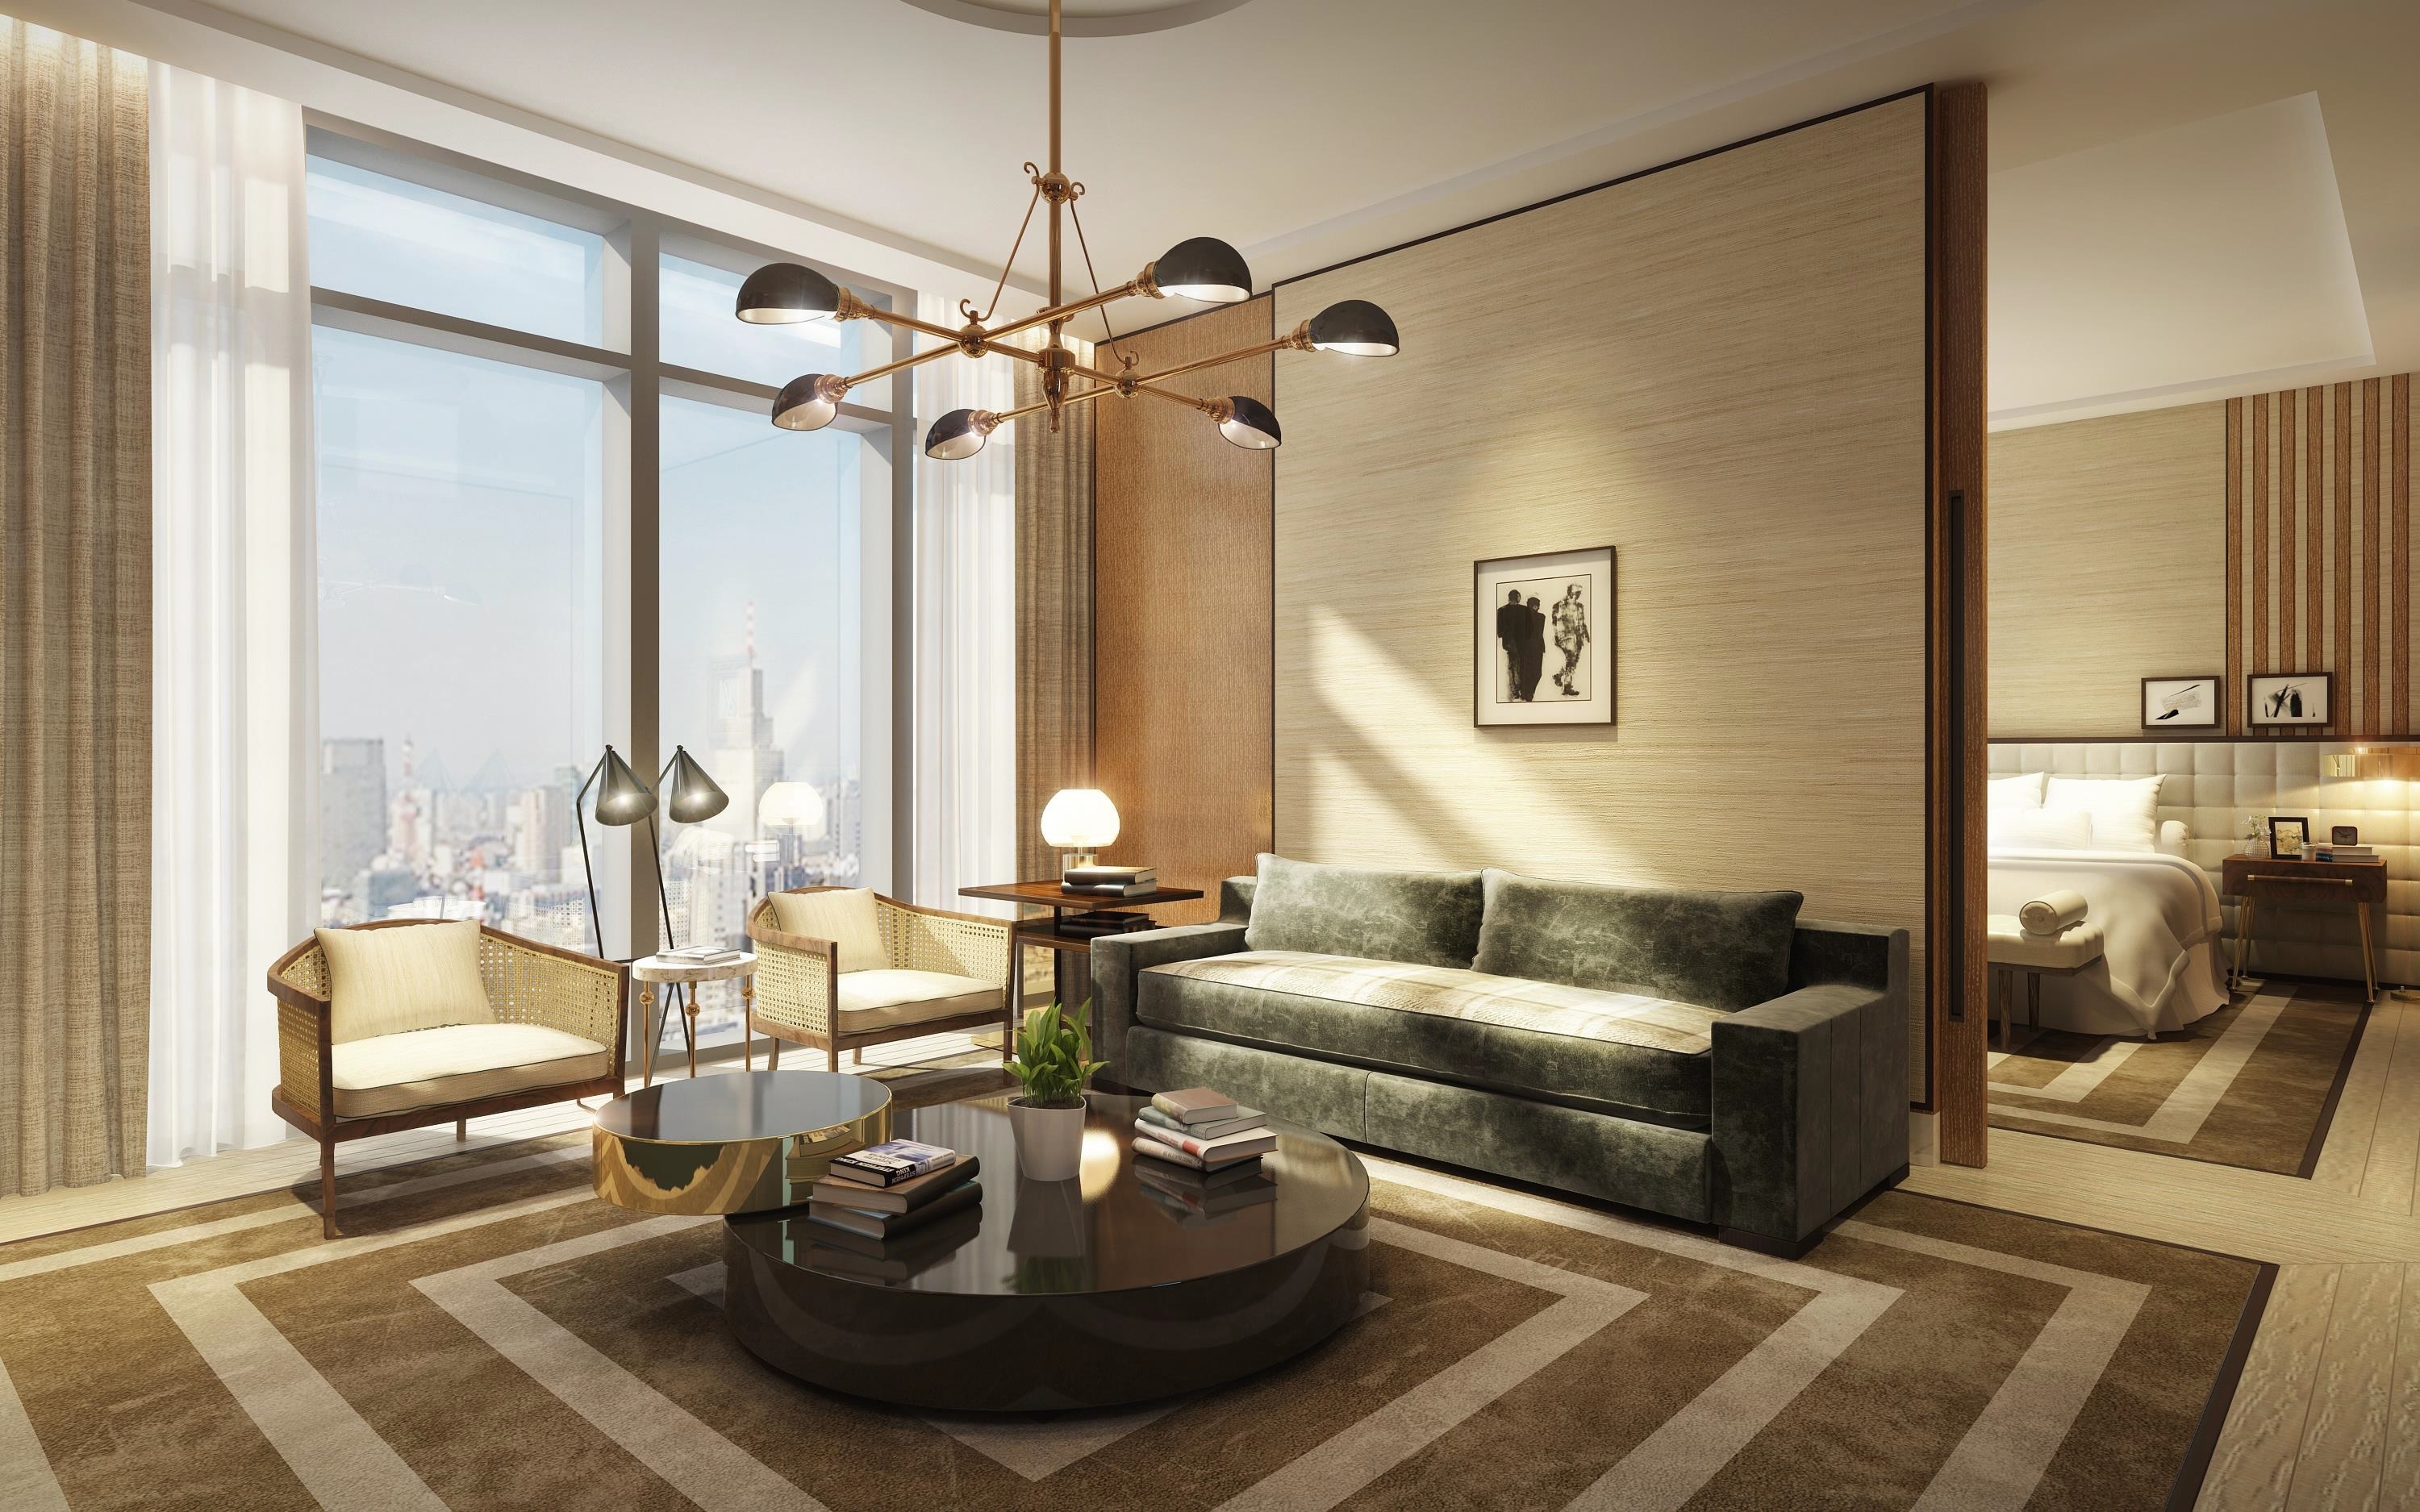 Interiors Revealed For 1960s Inspired Waldorf Astoria Hotel In